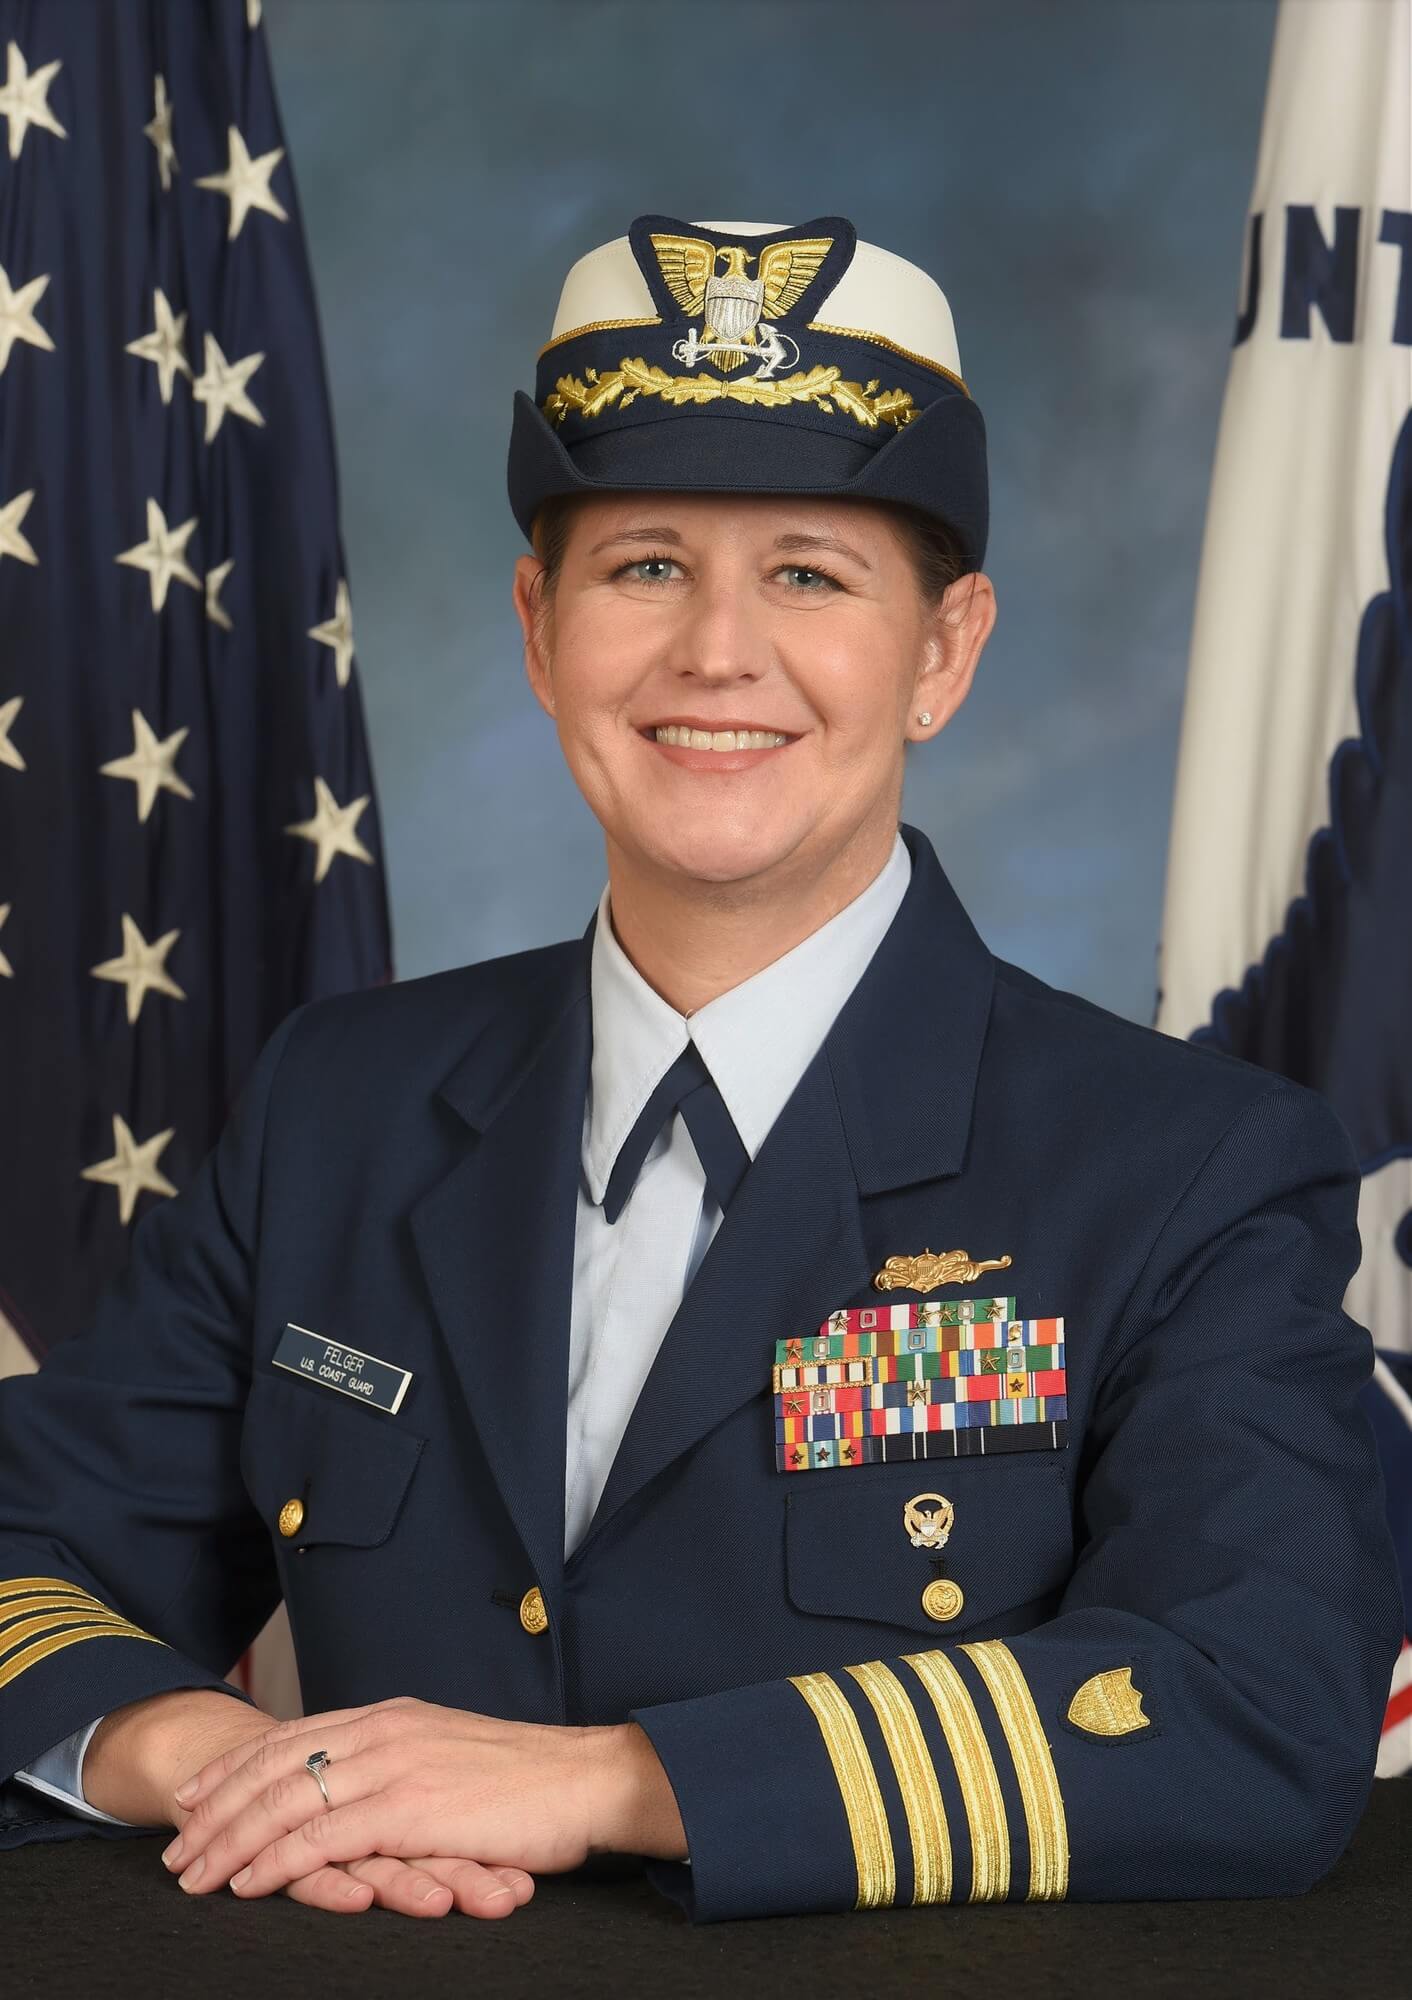 Capt. Kathy Felger will assume command of Coast Guard Training Center Cape May July 19